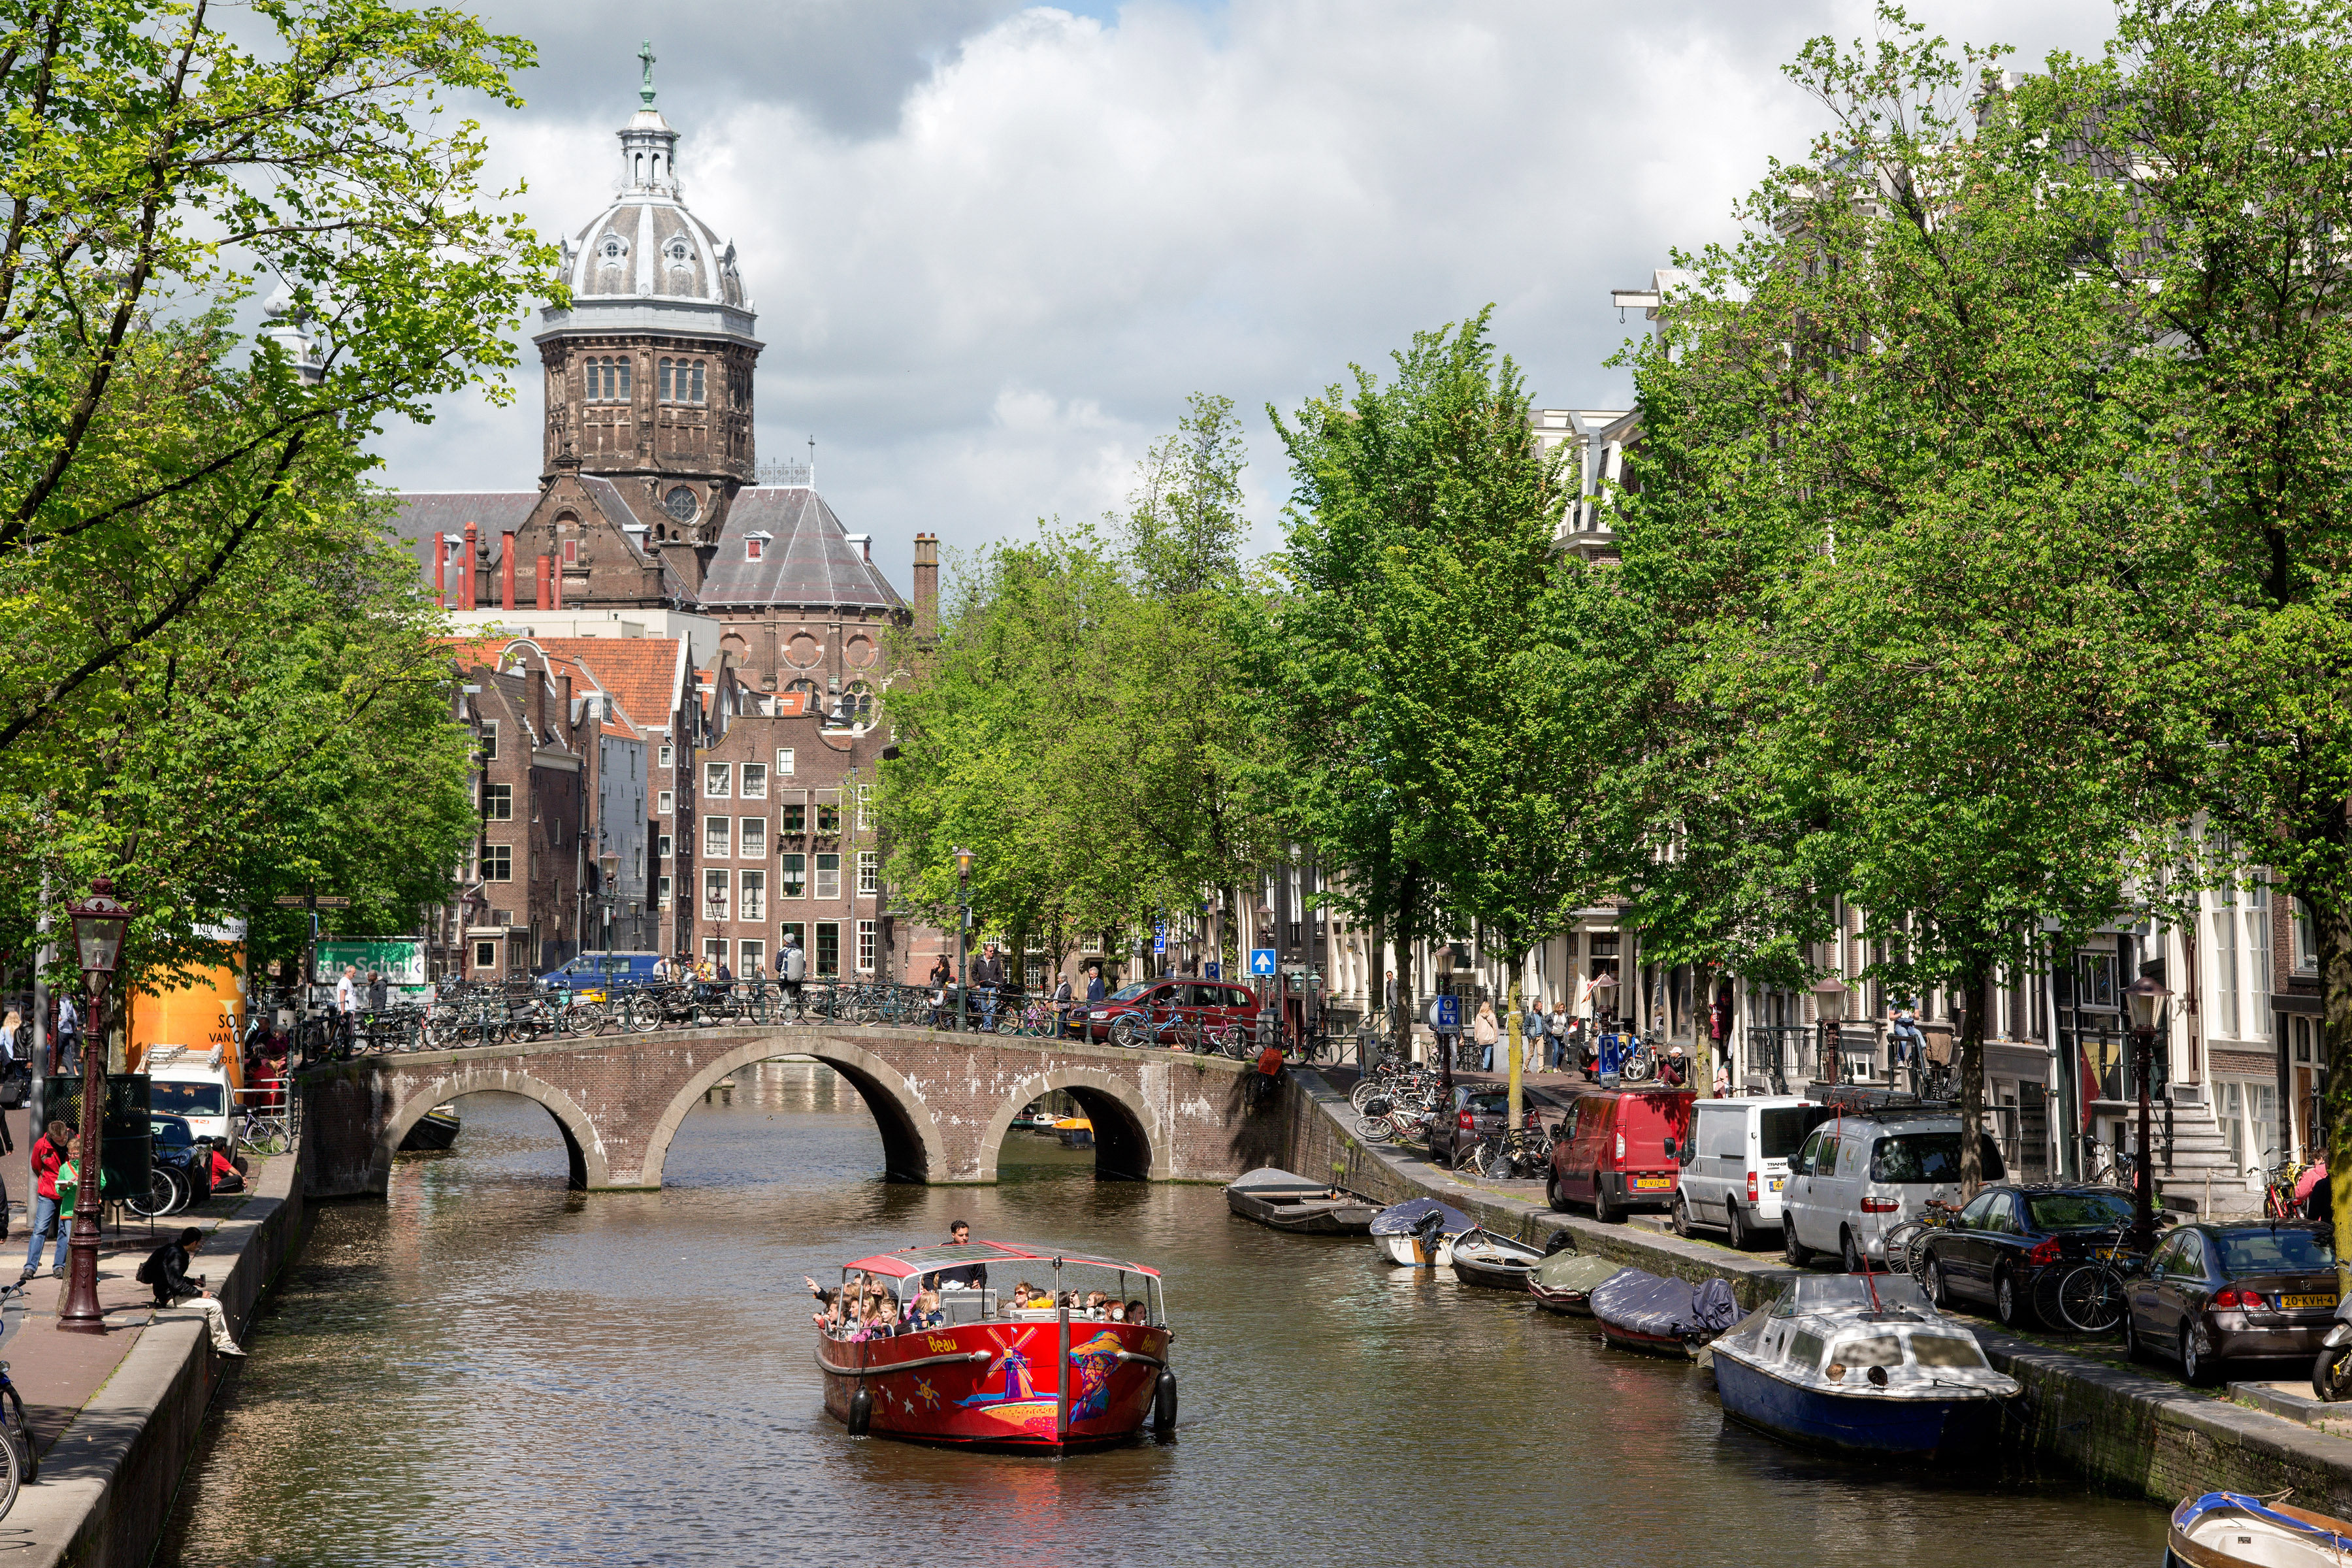 Canals of Amsterdam - Wikipedia